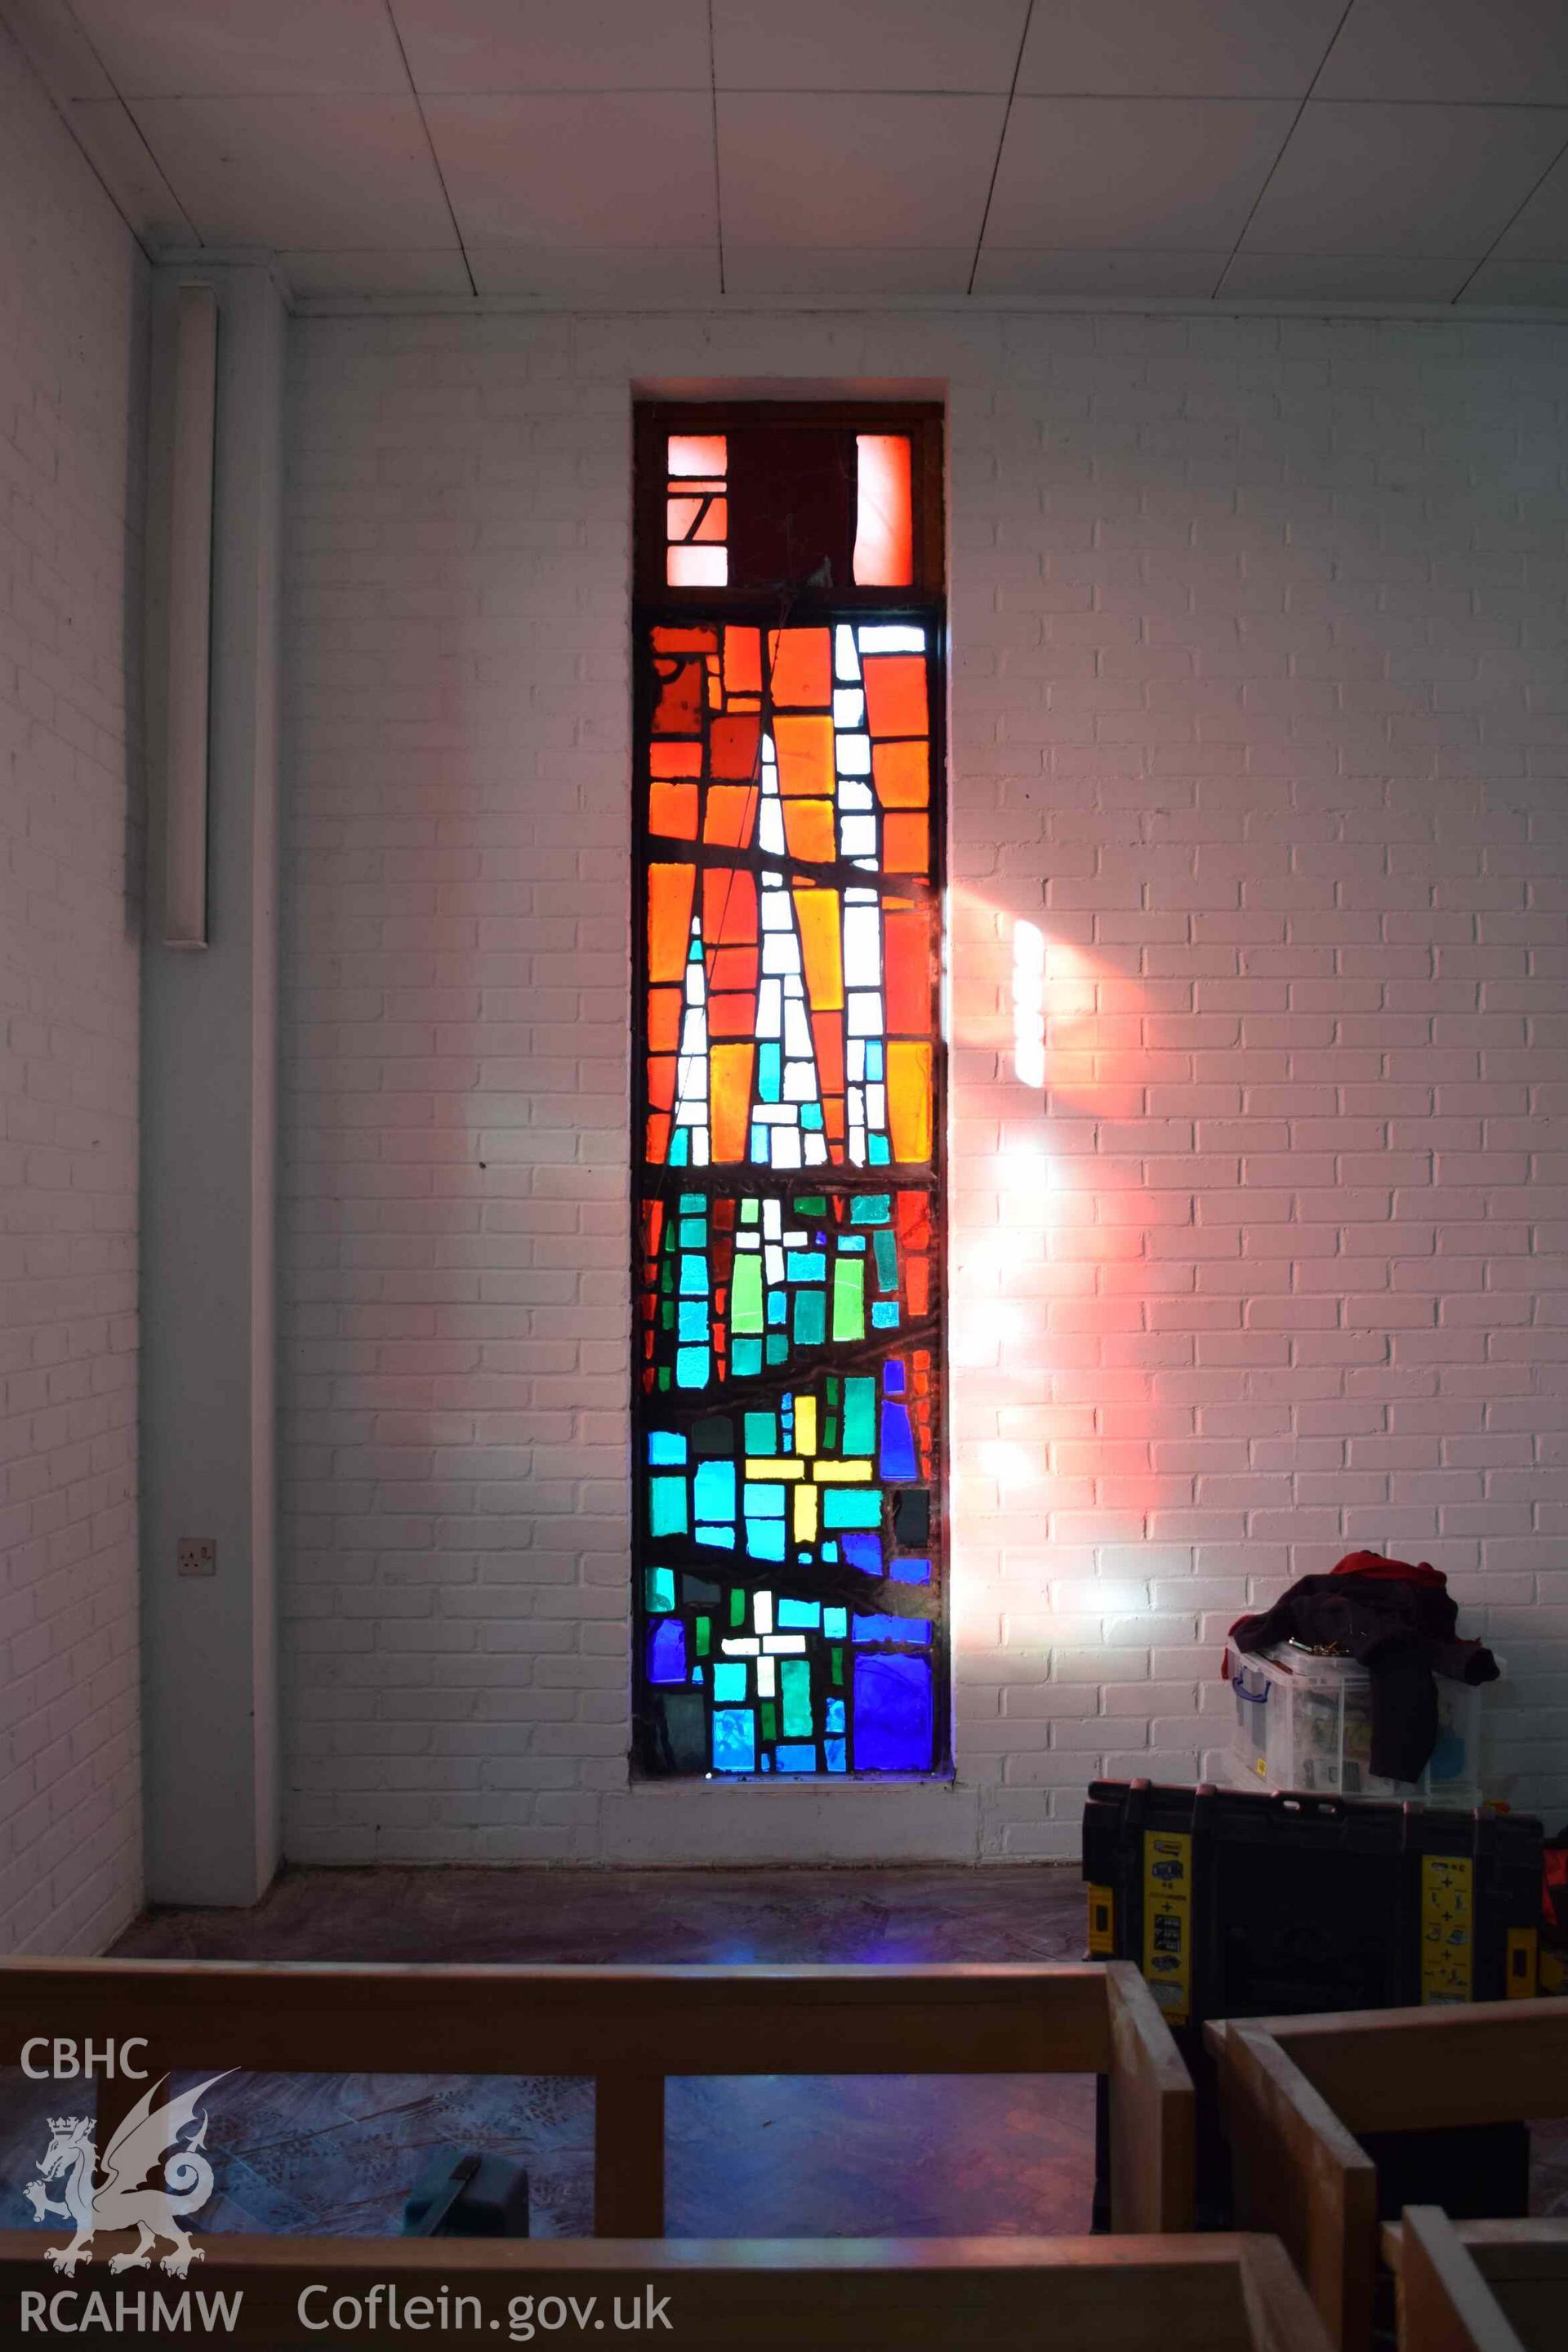 Photograph showing a Jonah Jones Dalle de Verre window (12a), at the church of The Resurrection of Our Saviour, Morfa Nefyn, taken on behalf of the Architectural Glass Centre during the removal of the windows in March 2019.